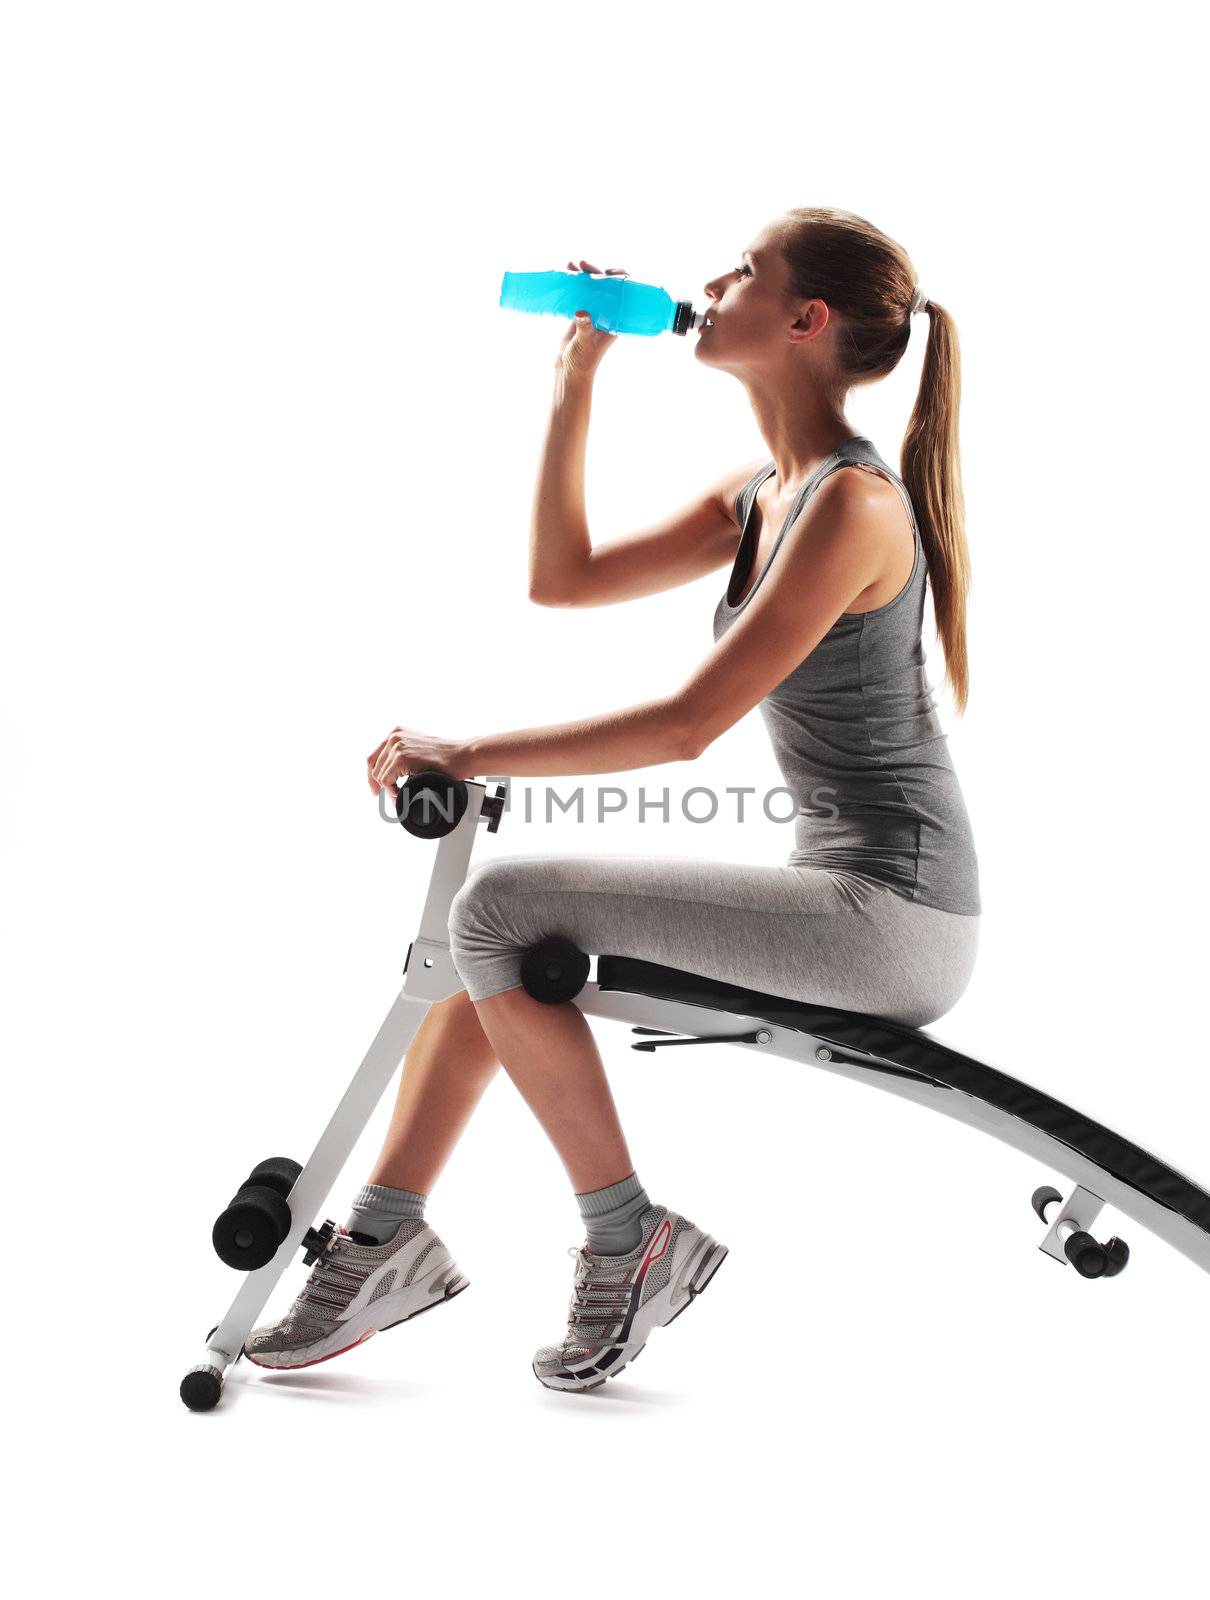 Thirsty young woman drinking after fitness workout.
